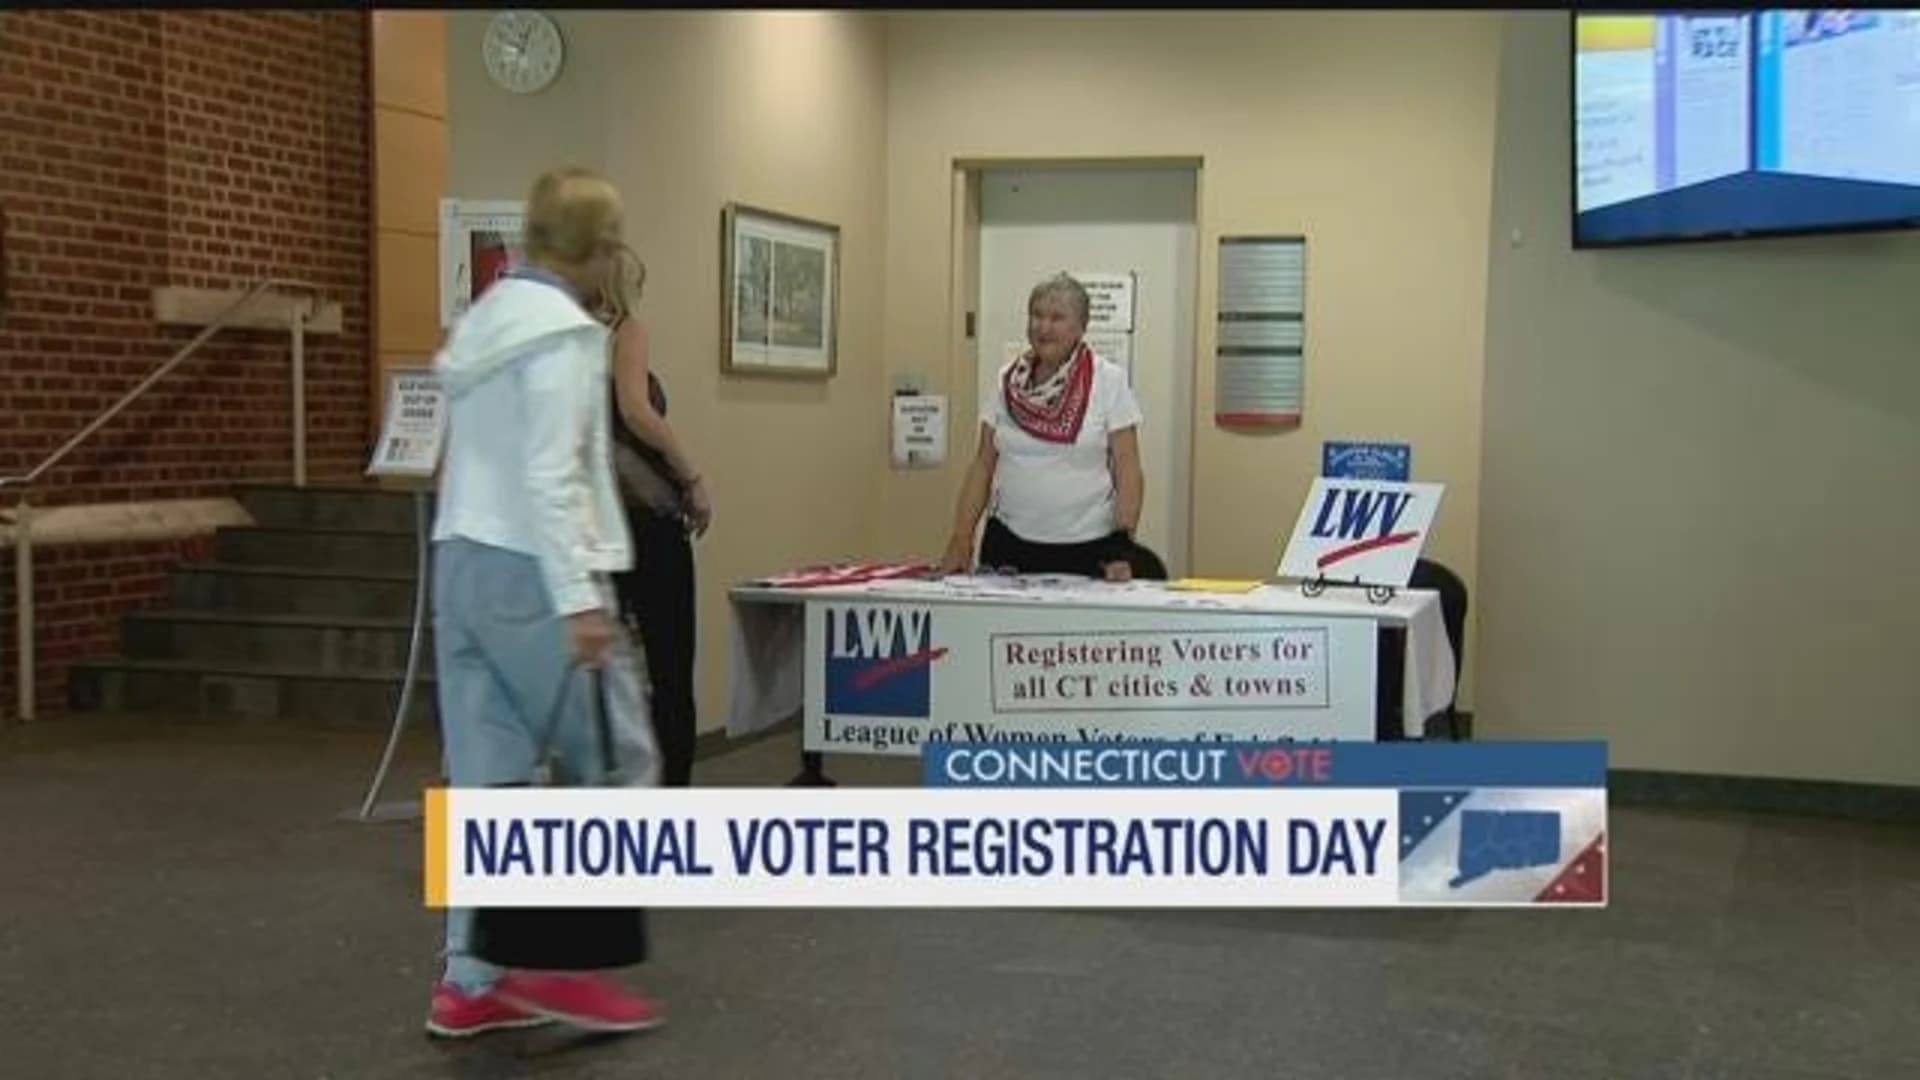 Residents sign up to vote on National Voter Registration Day